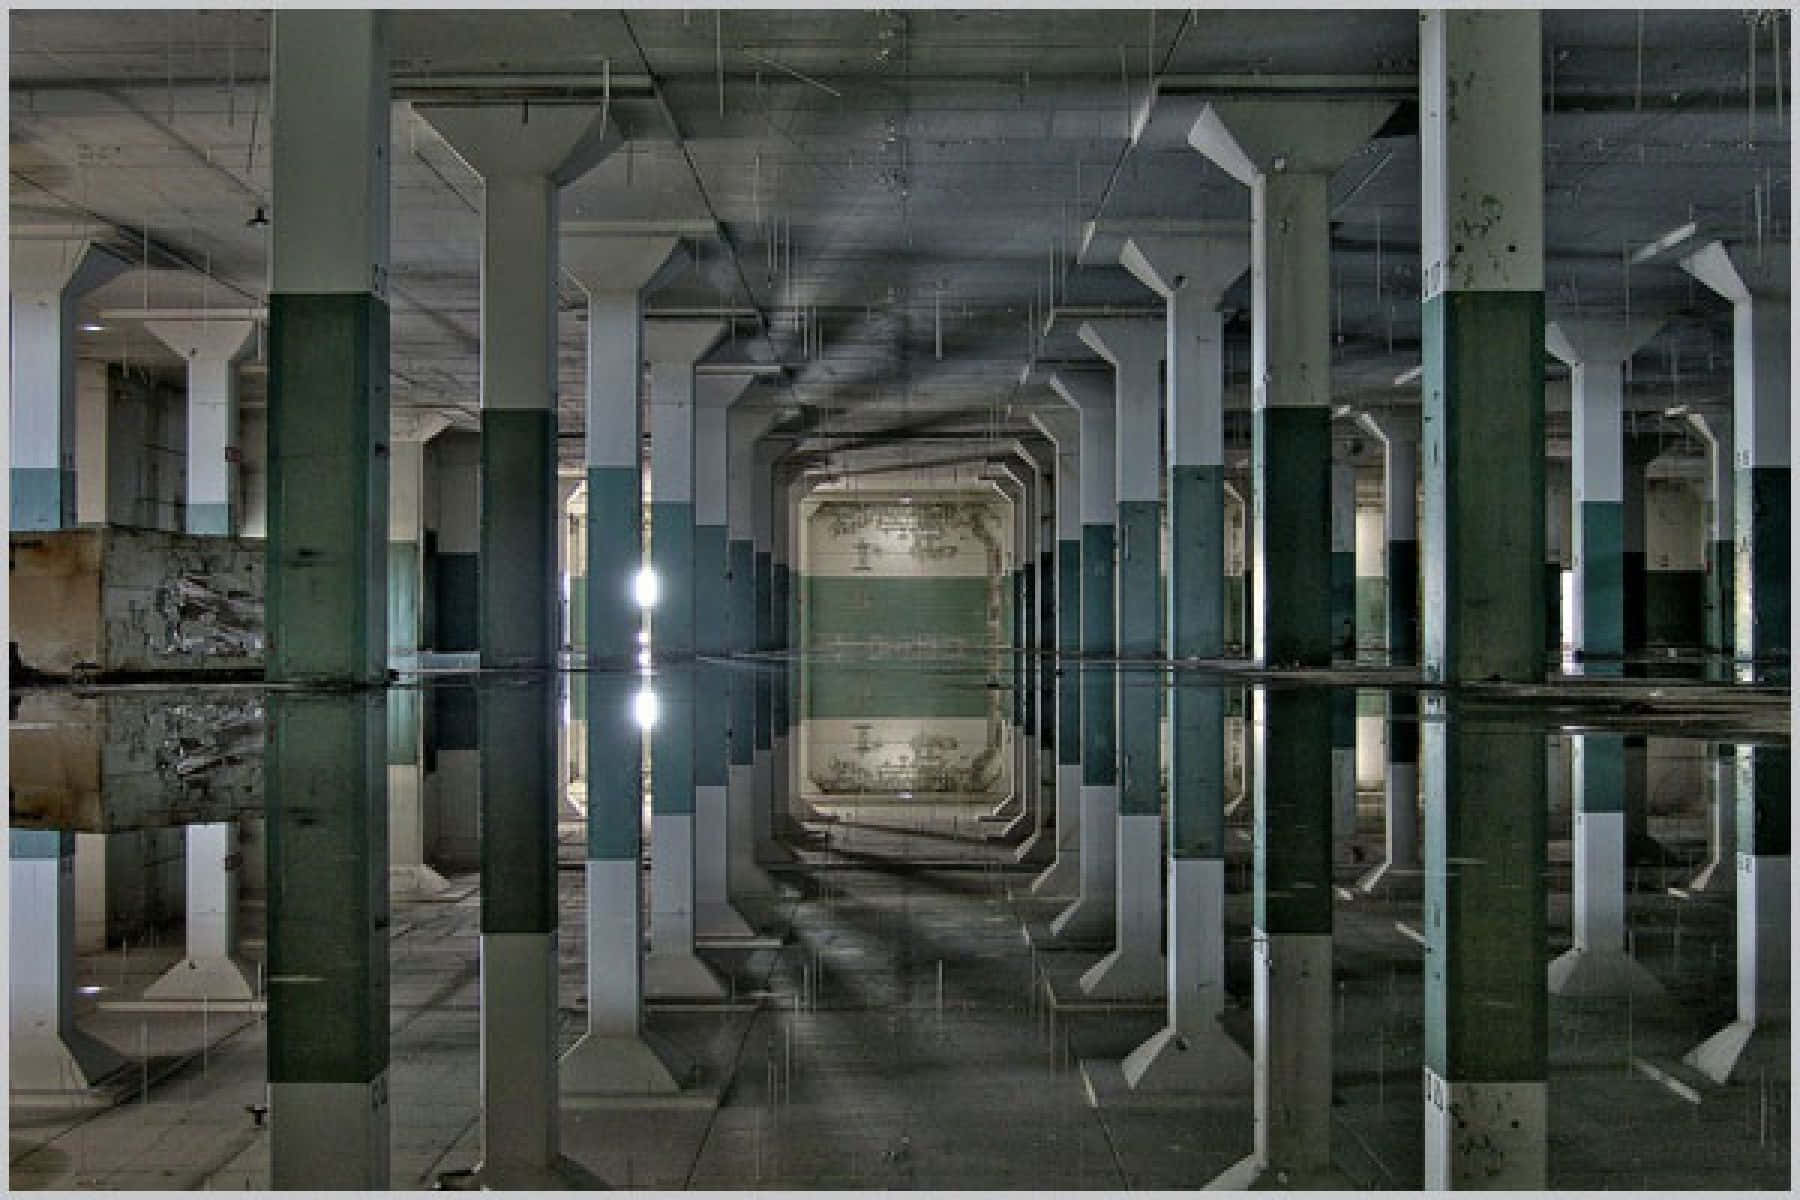 A Large Building With Columns And Water Reflected In It